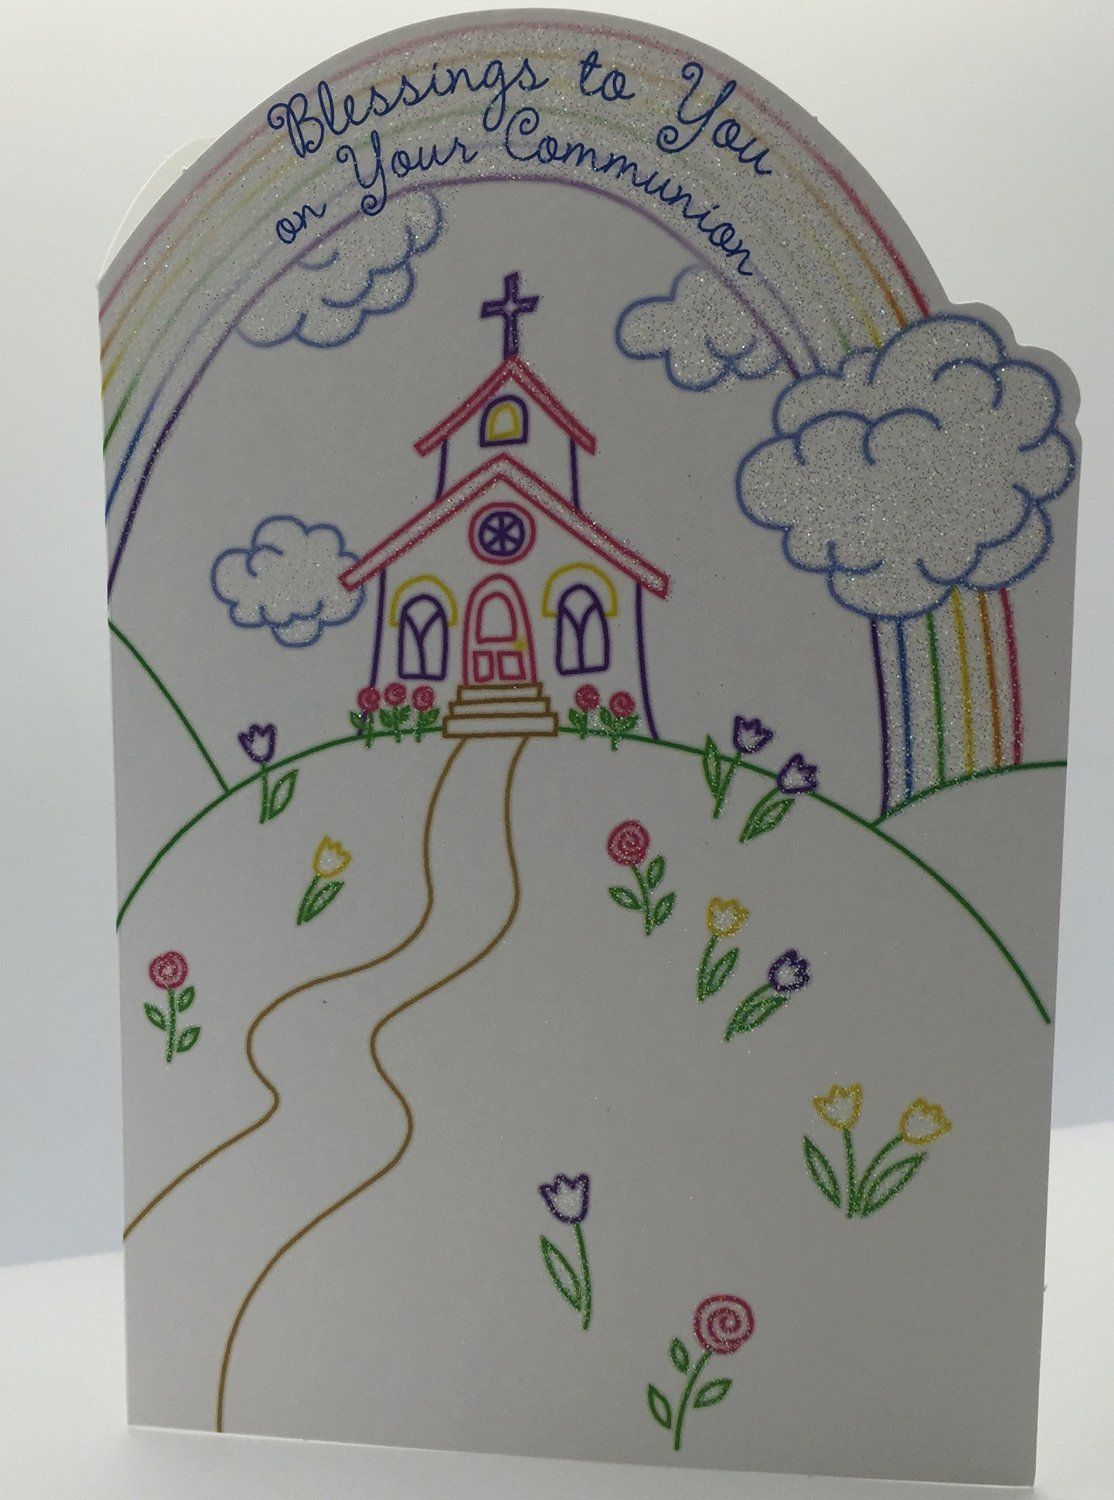 Blessing to you on your Communion Church & Ranibow Communion Greeting card 